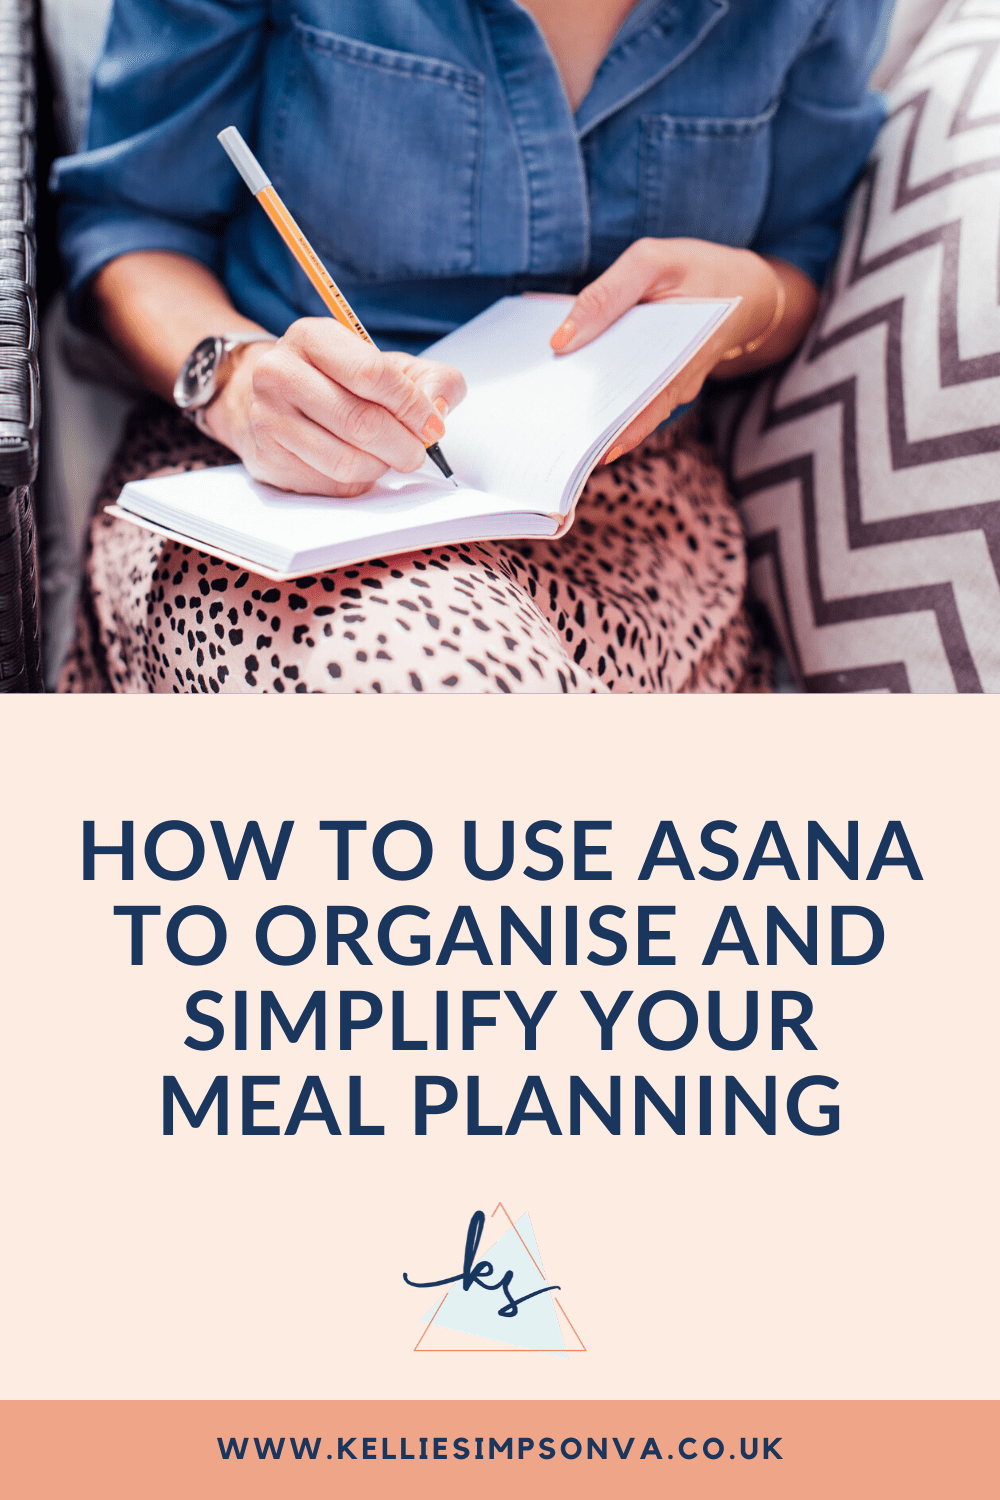 How to use Asana to organise and simplify your meal planning